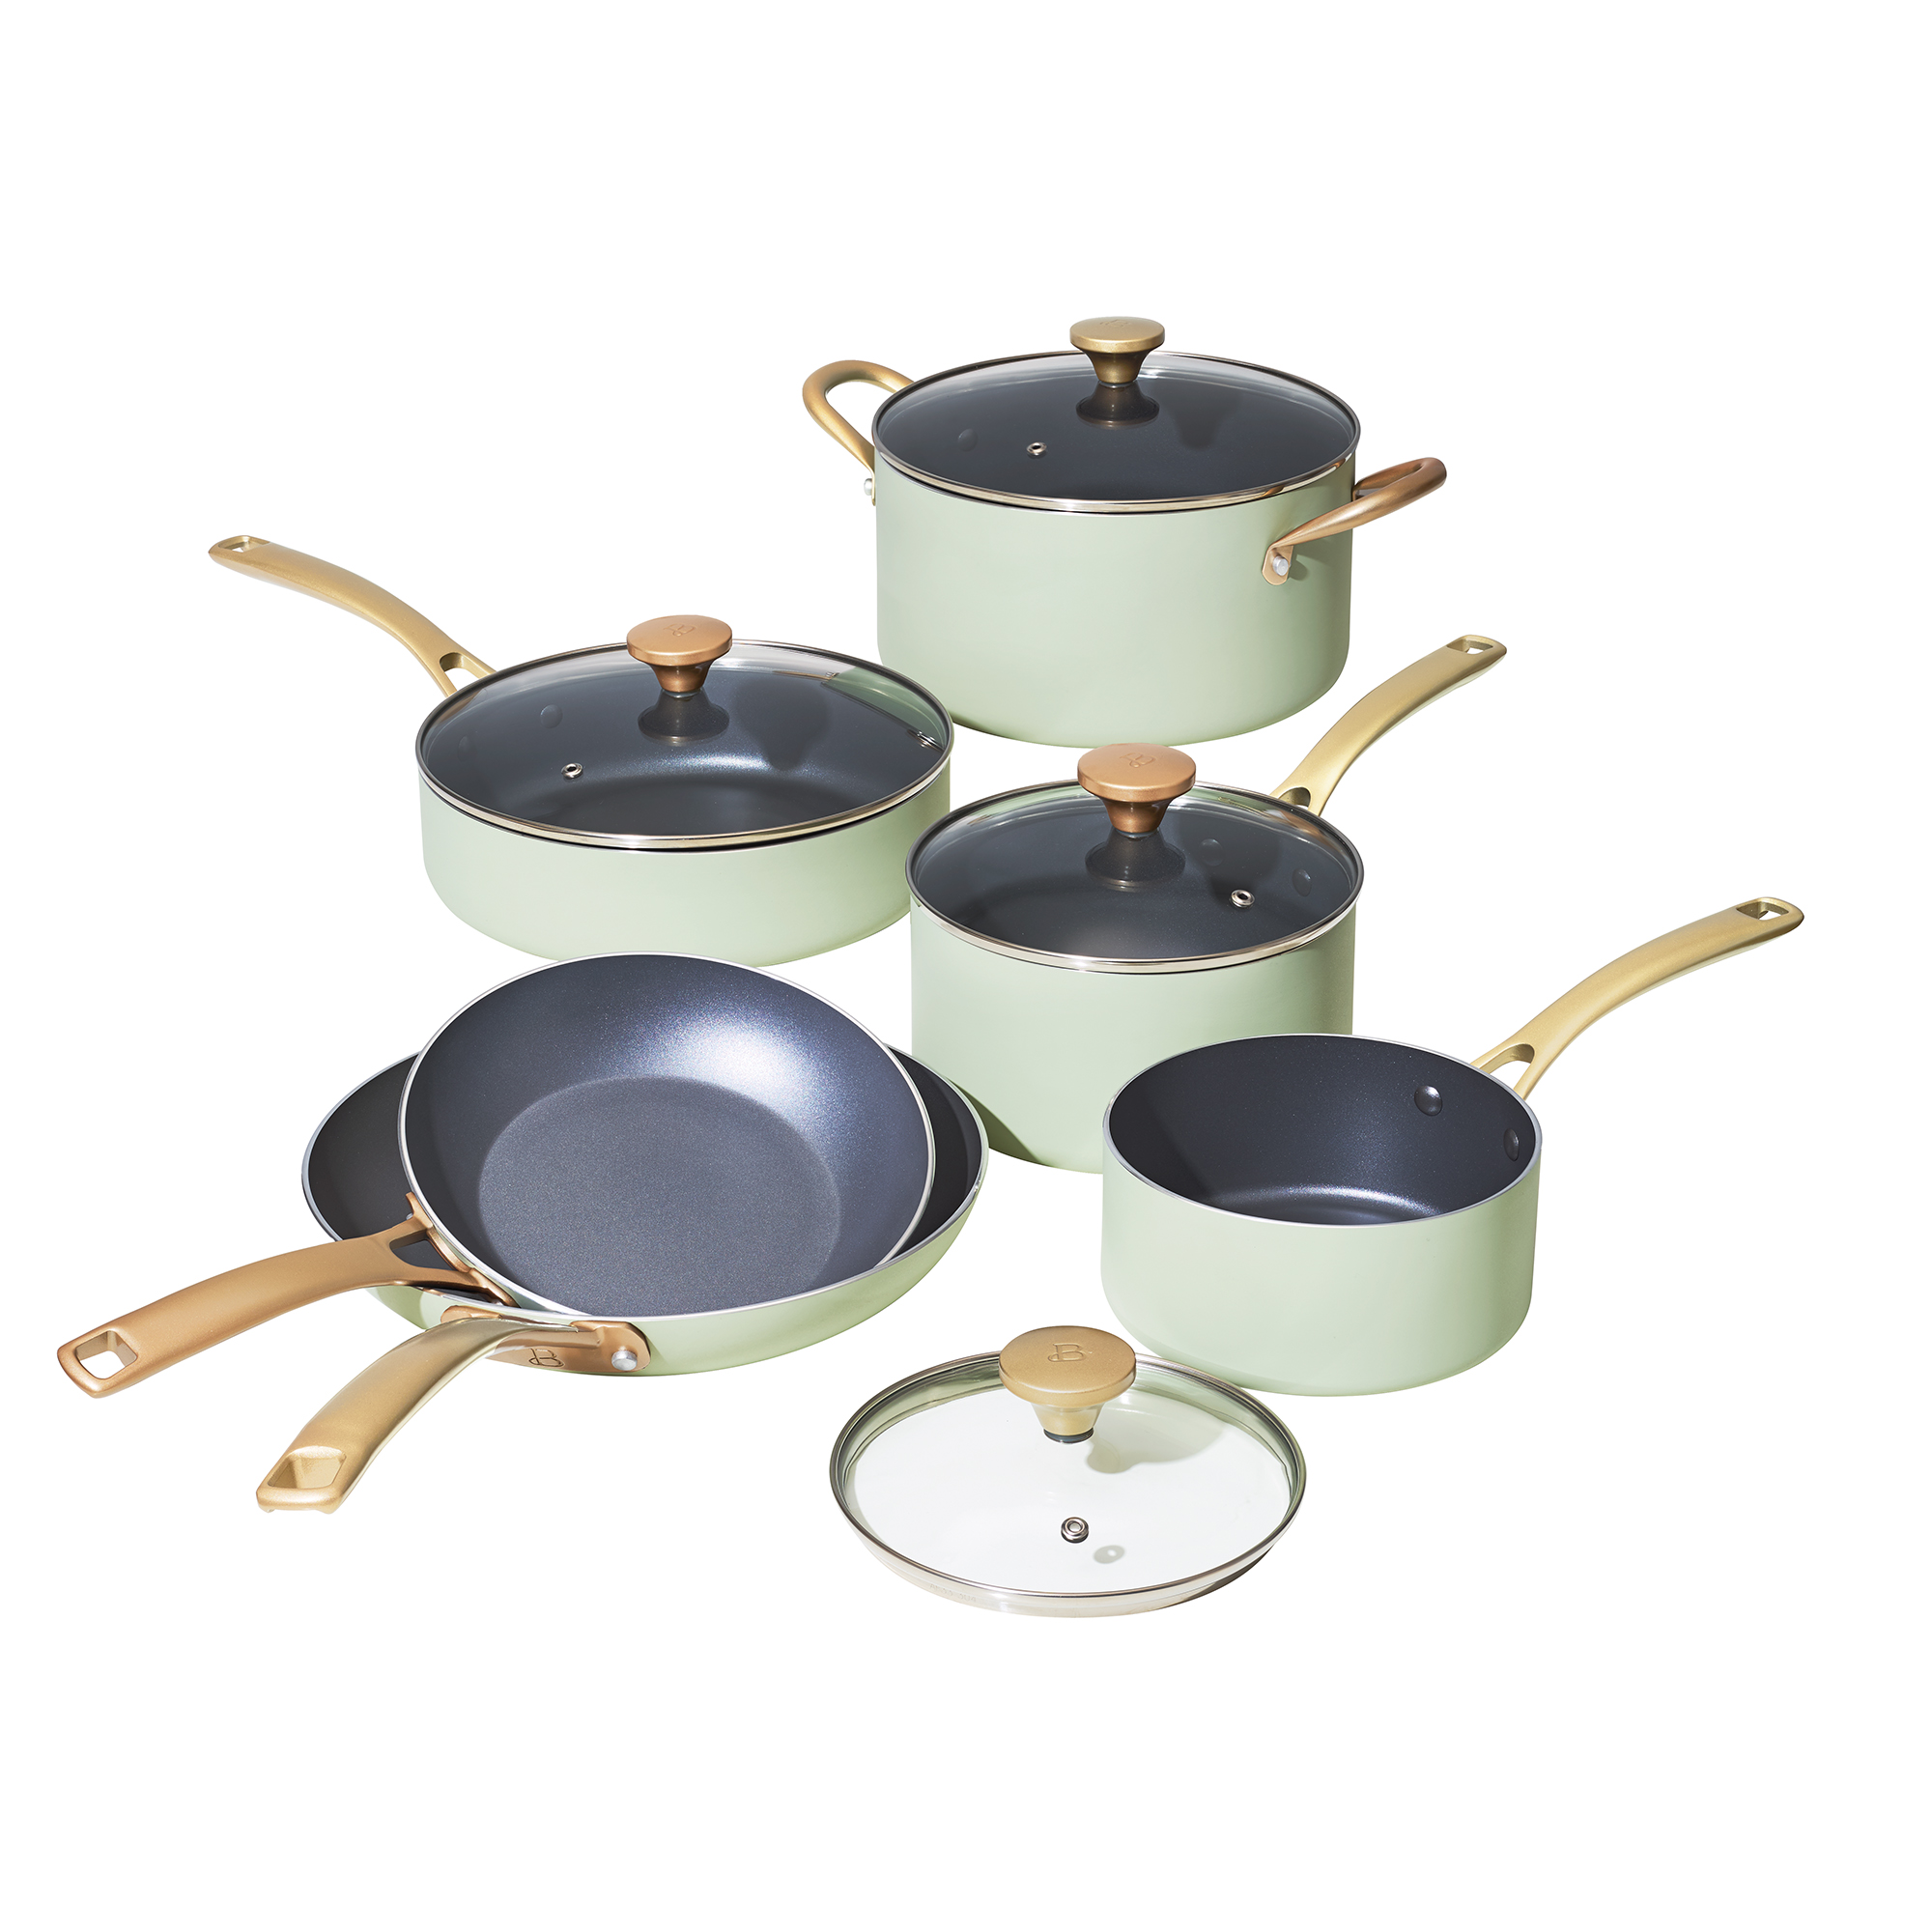 Beautiful 10 PC Cookware Set, Sage Green by Drew Barrymore - image 1 of 10